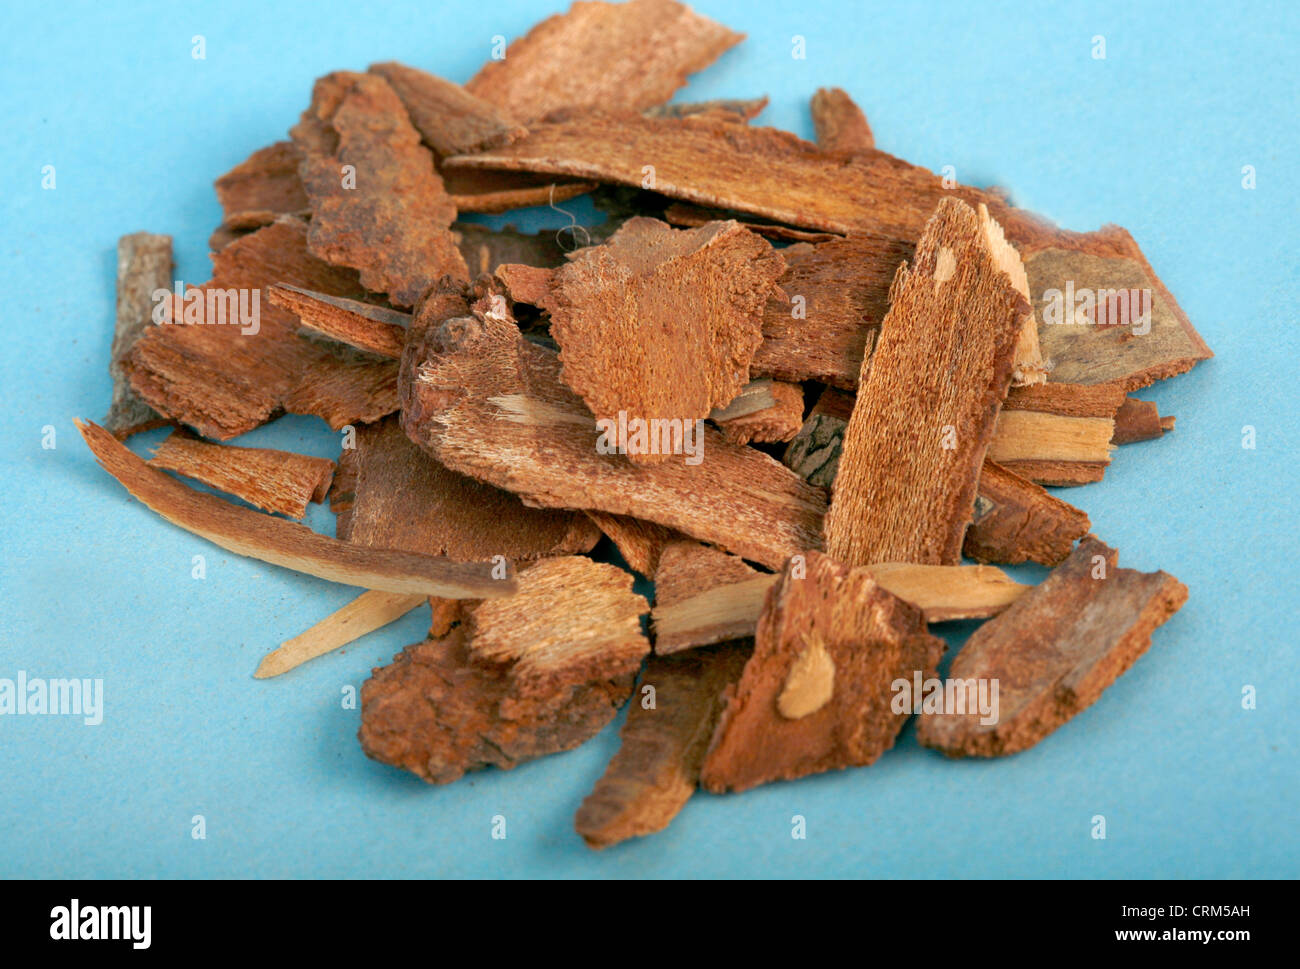 Cherry bark infused into a tea is used to treat sore throats, sores, burns, wounds. Stock Photo